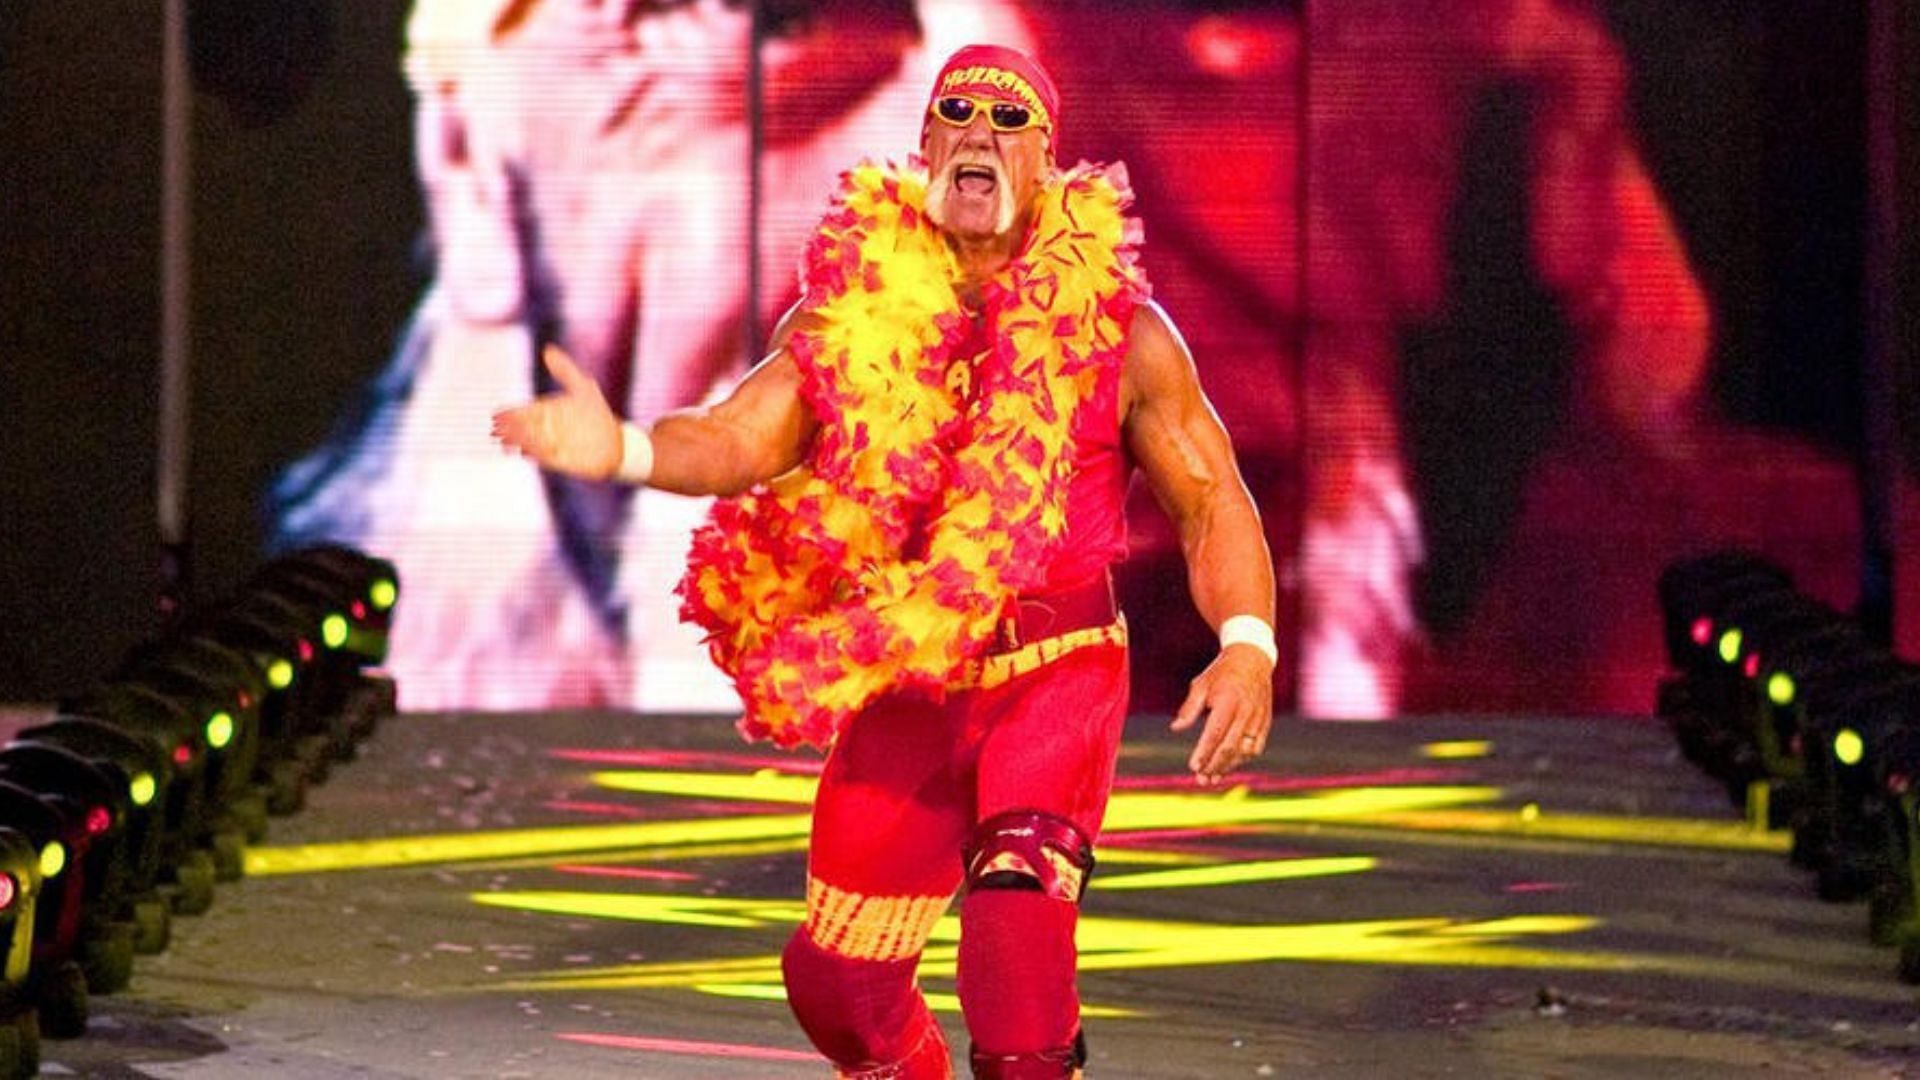 Hulk Hogan is one of the most iconic figures in professional wrestling